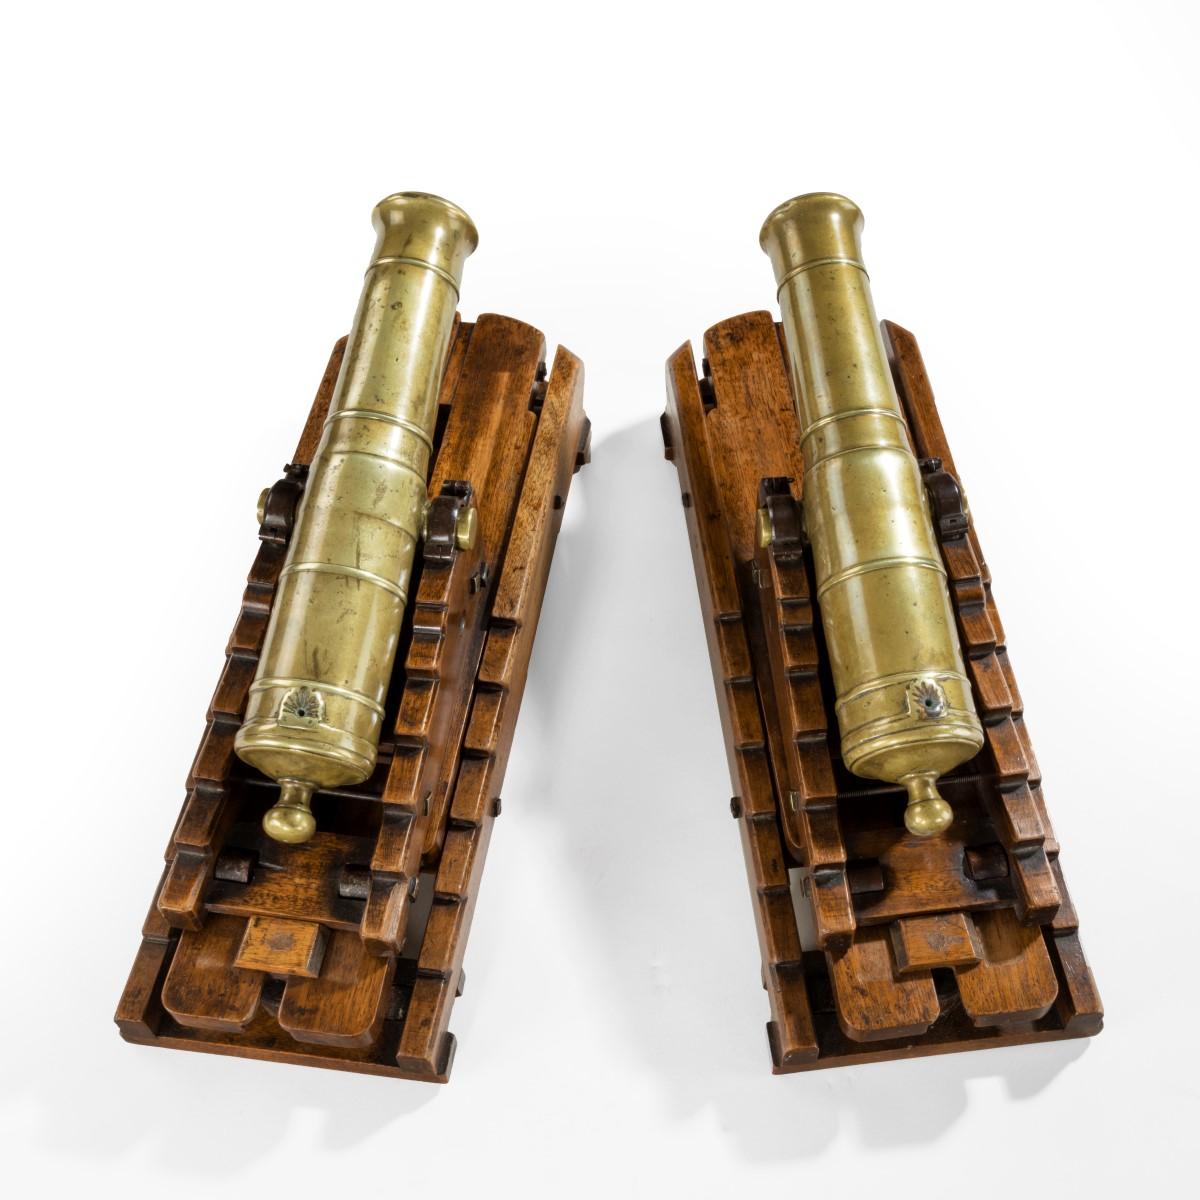 A pair of brass 19th century models of ship’s 32-pounder cannon